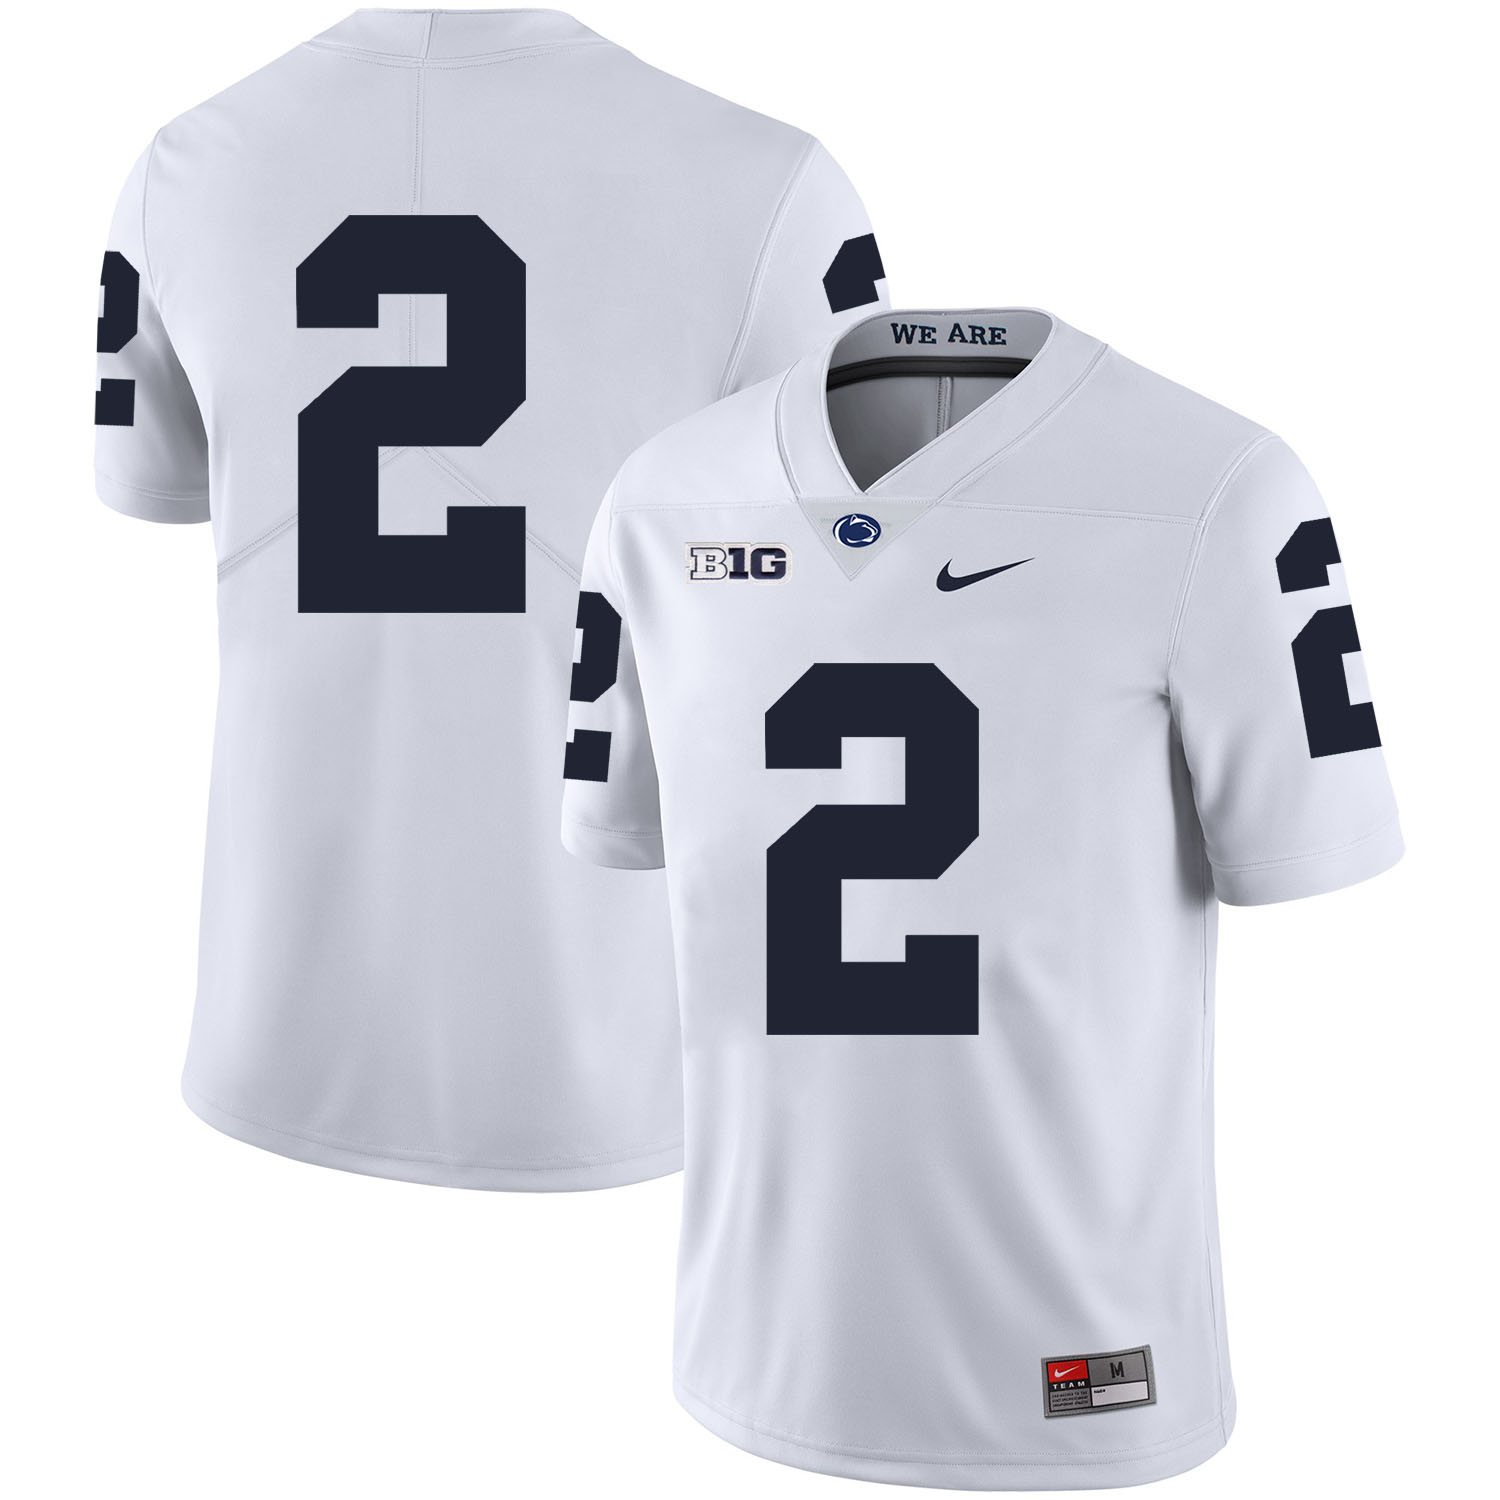 Penn State Nittany Lions 2 Marcus Allen White Nike College Football Jersey